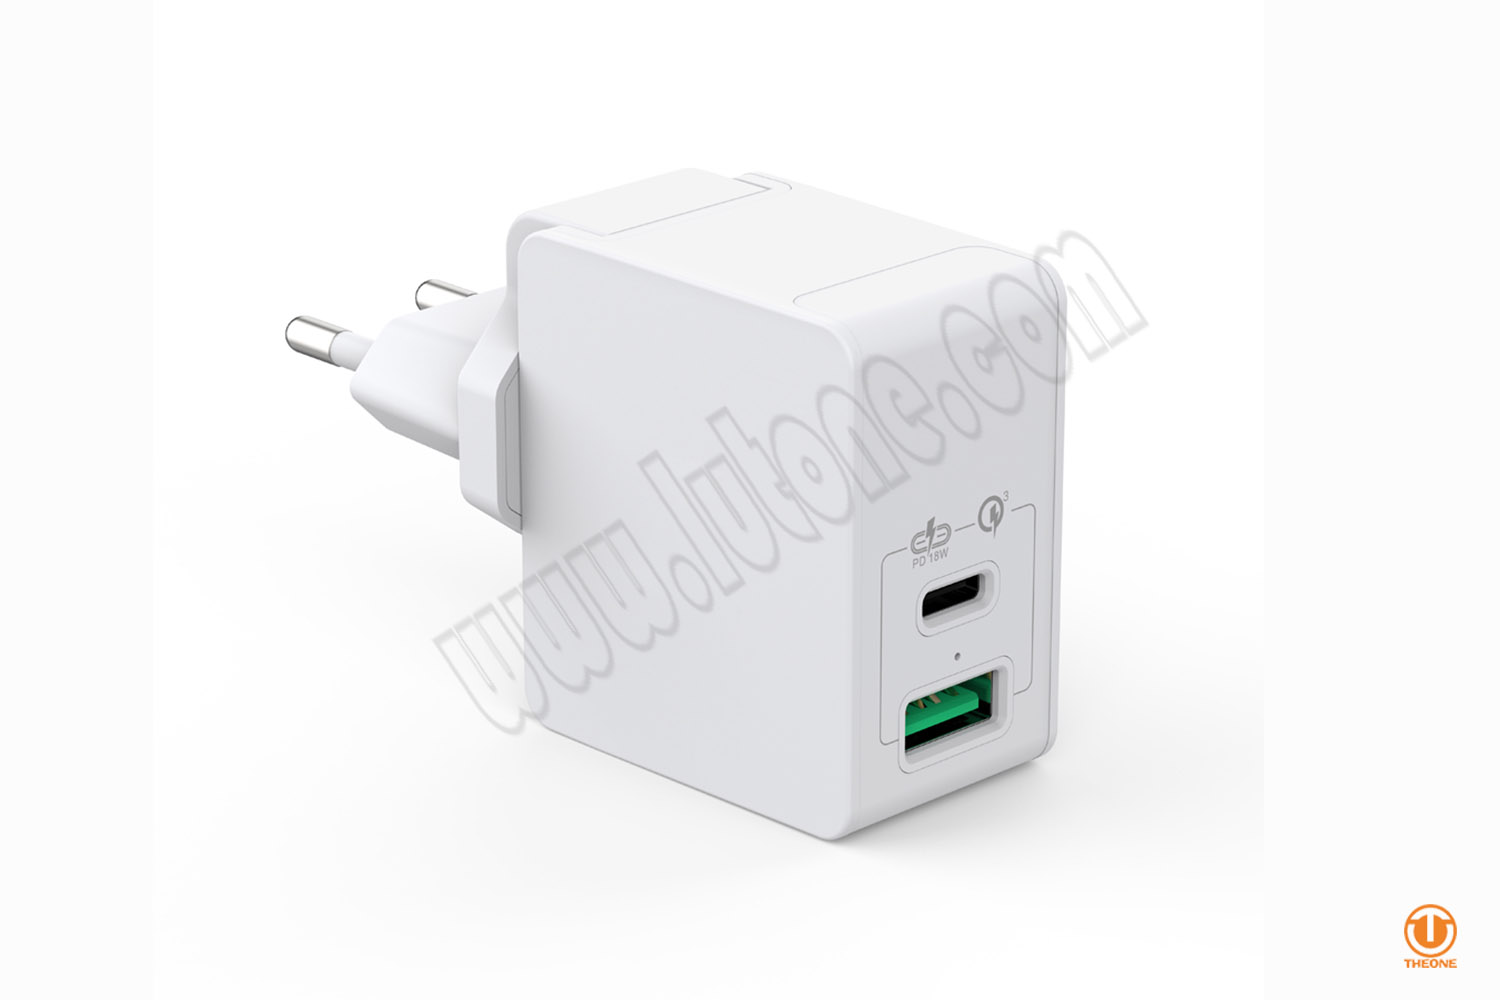 18W USB-C PD Charger